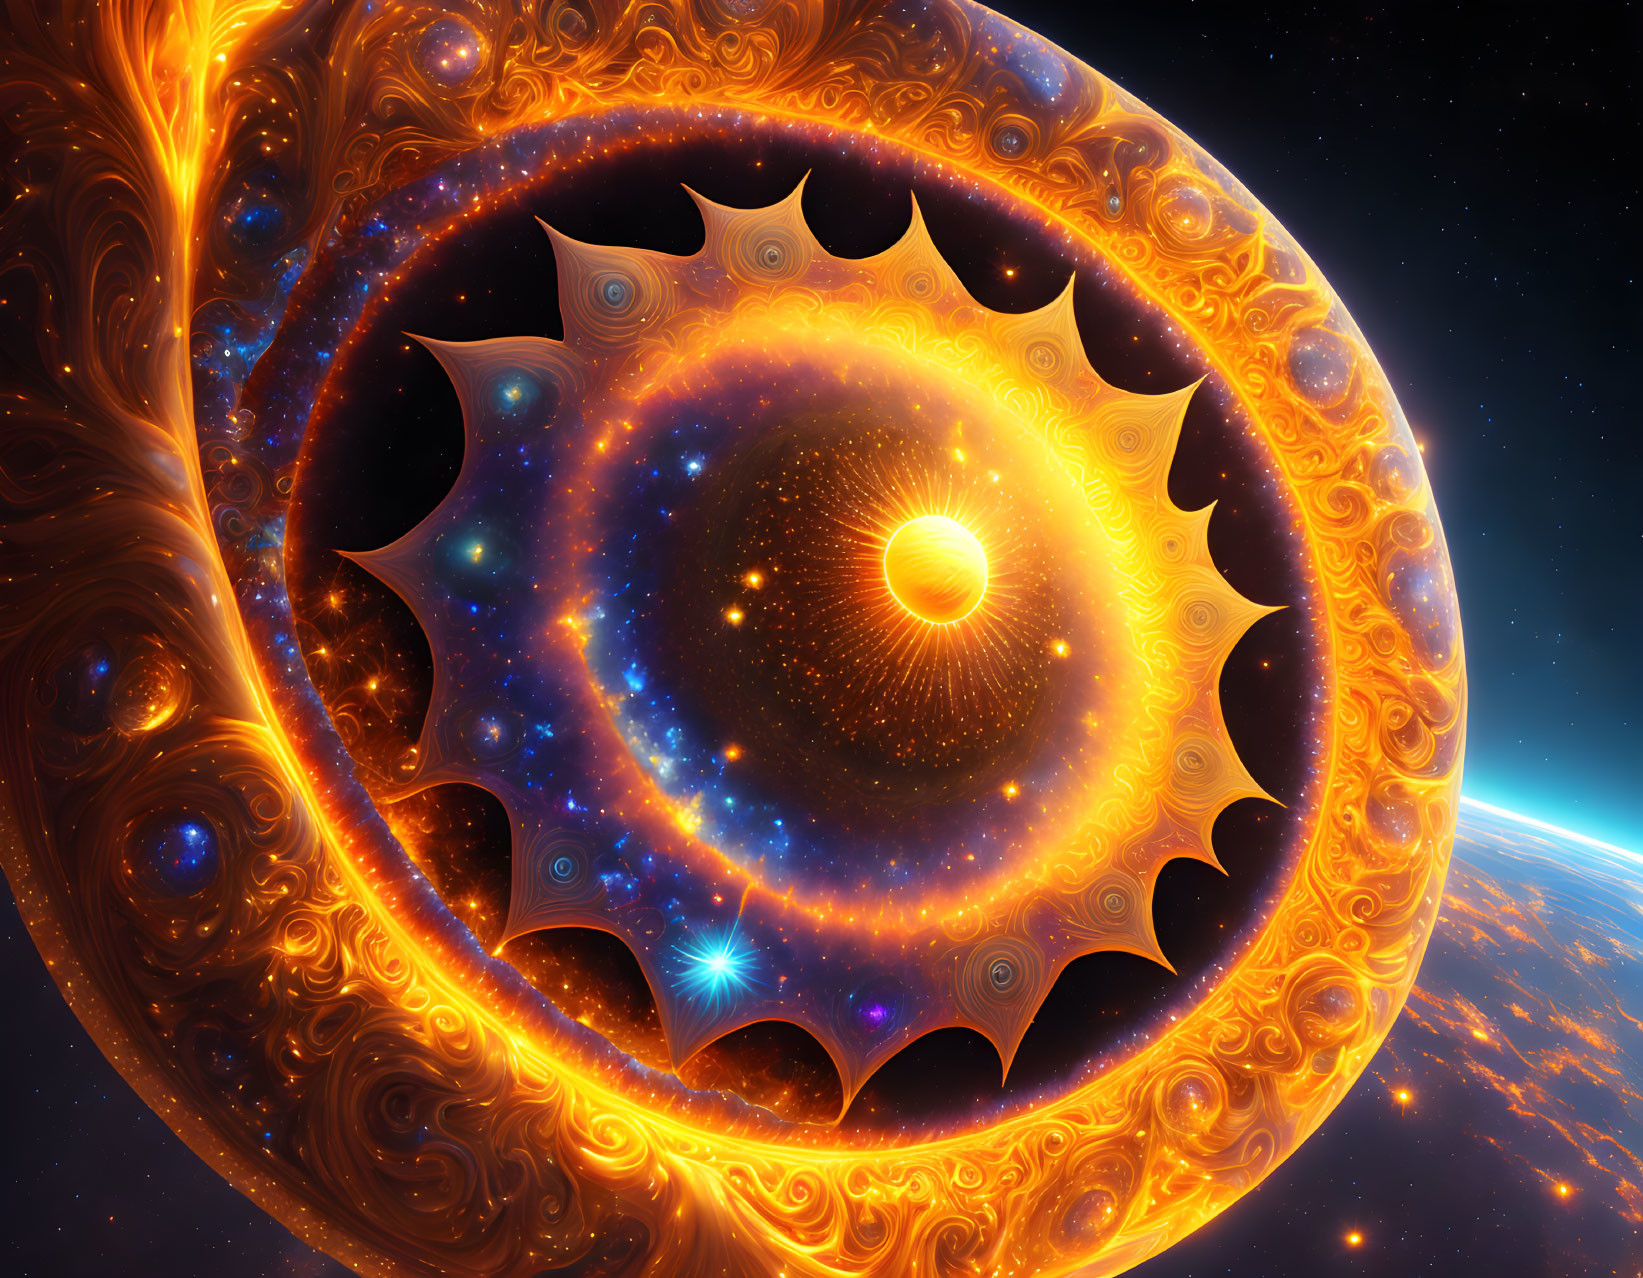 Colorful Fractal Artwork: Circular Portal with Fiery Orange and Cool Blue Details